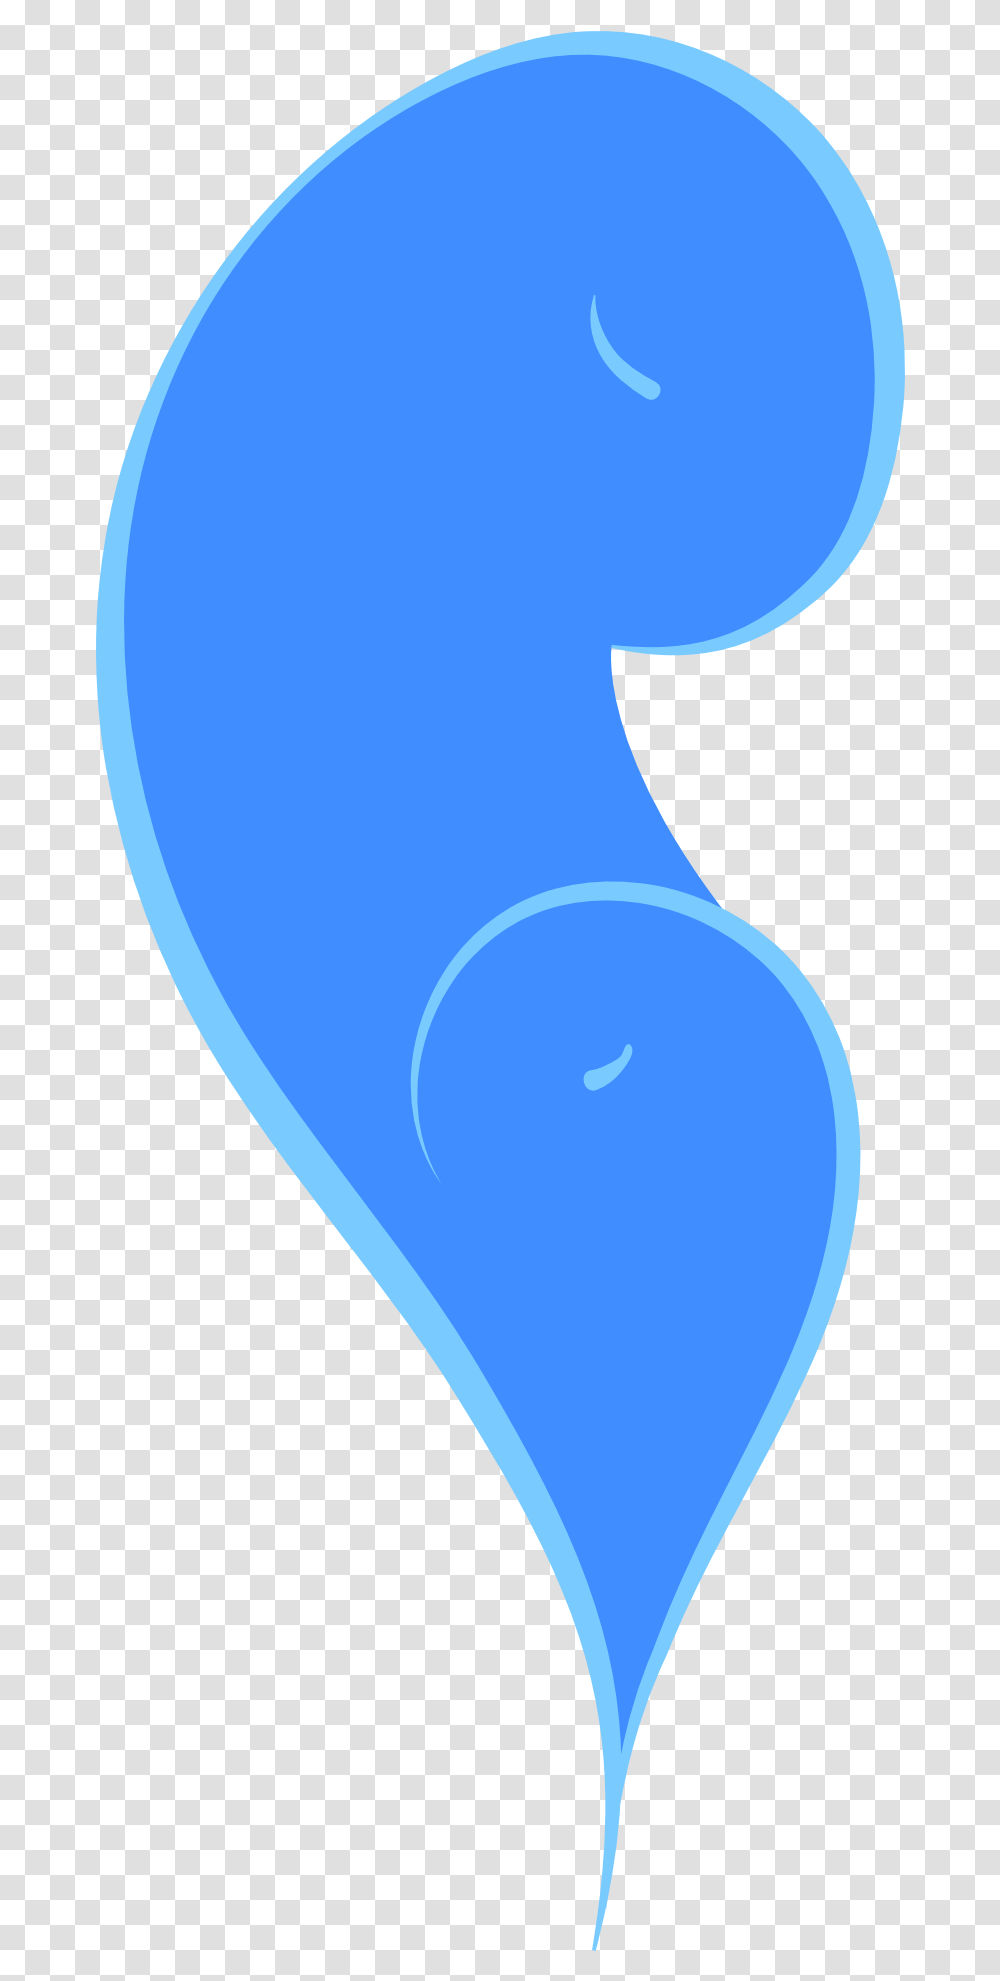 Blue Stylized Love Icon Drawing Free Image Download Dot, Balloon, Light, Symbol, Number Transparent Png